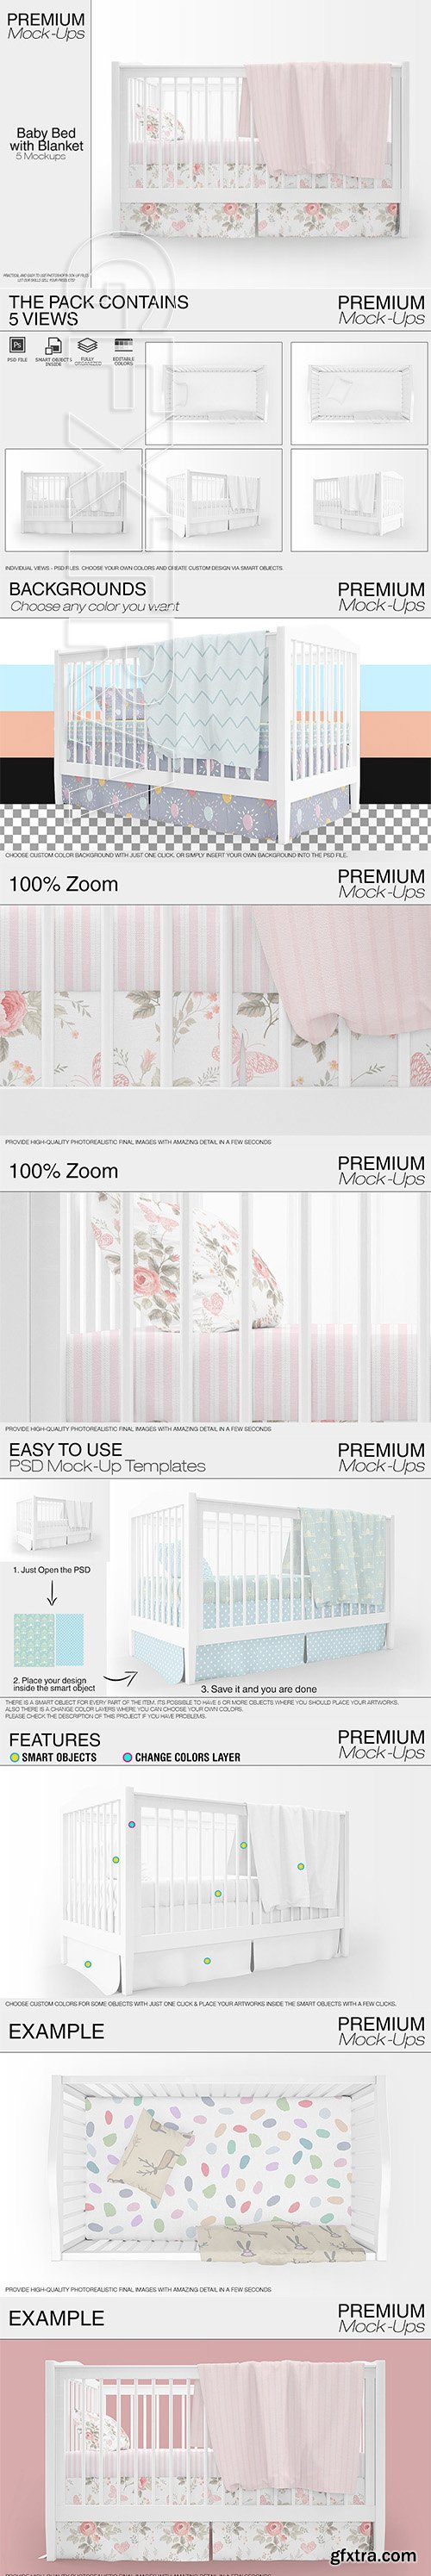 CreativeMarket - Baby Bed with Blanket Set 2880476